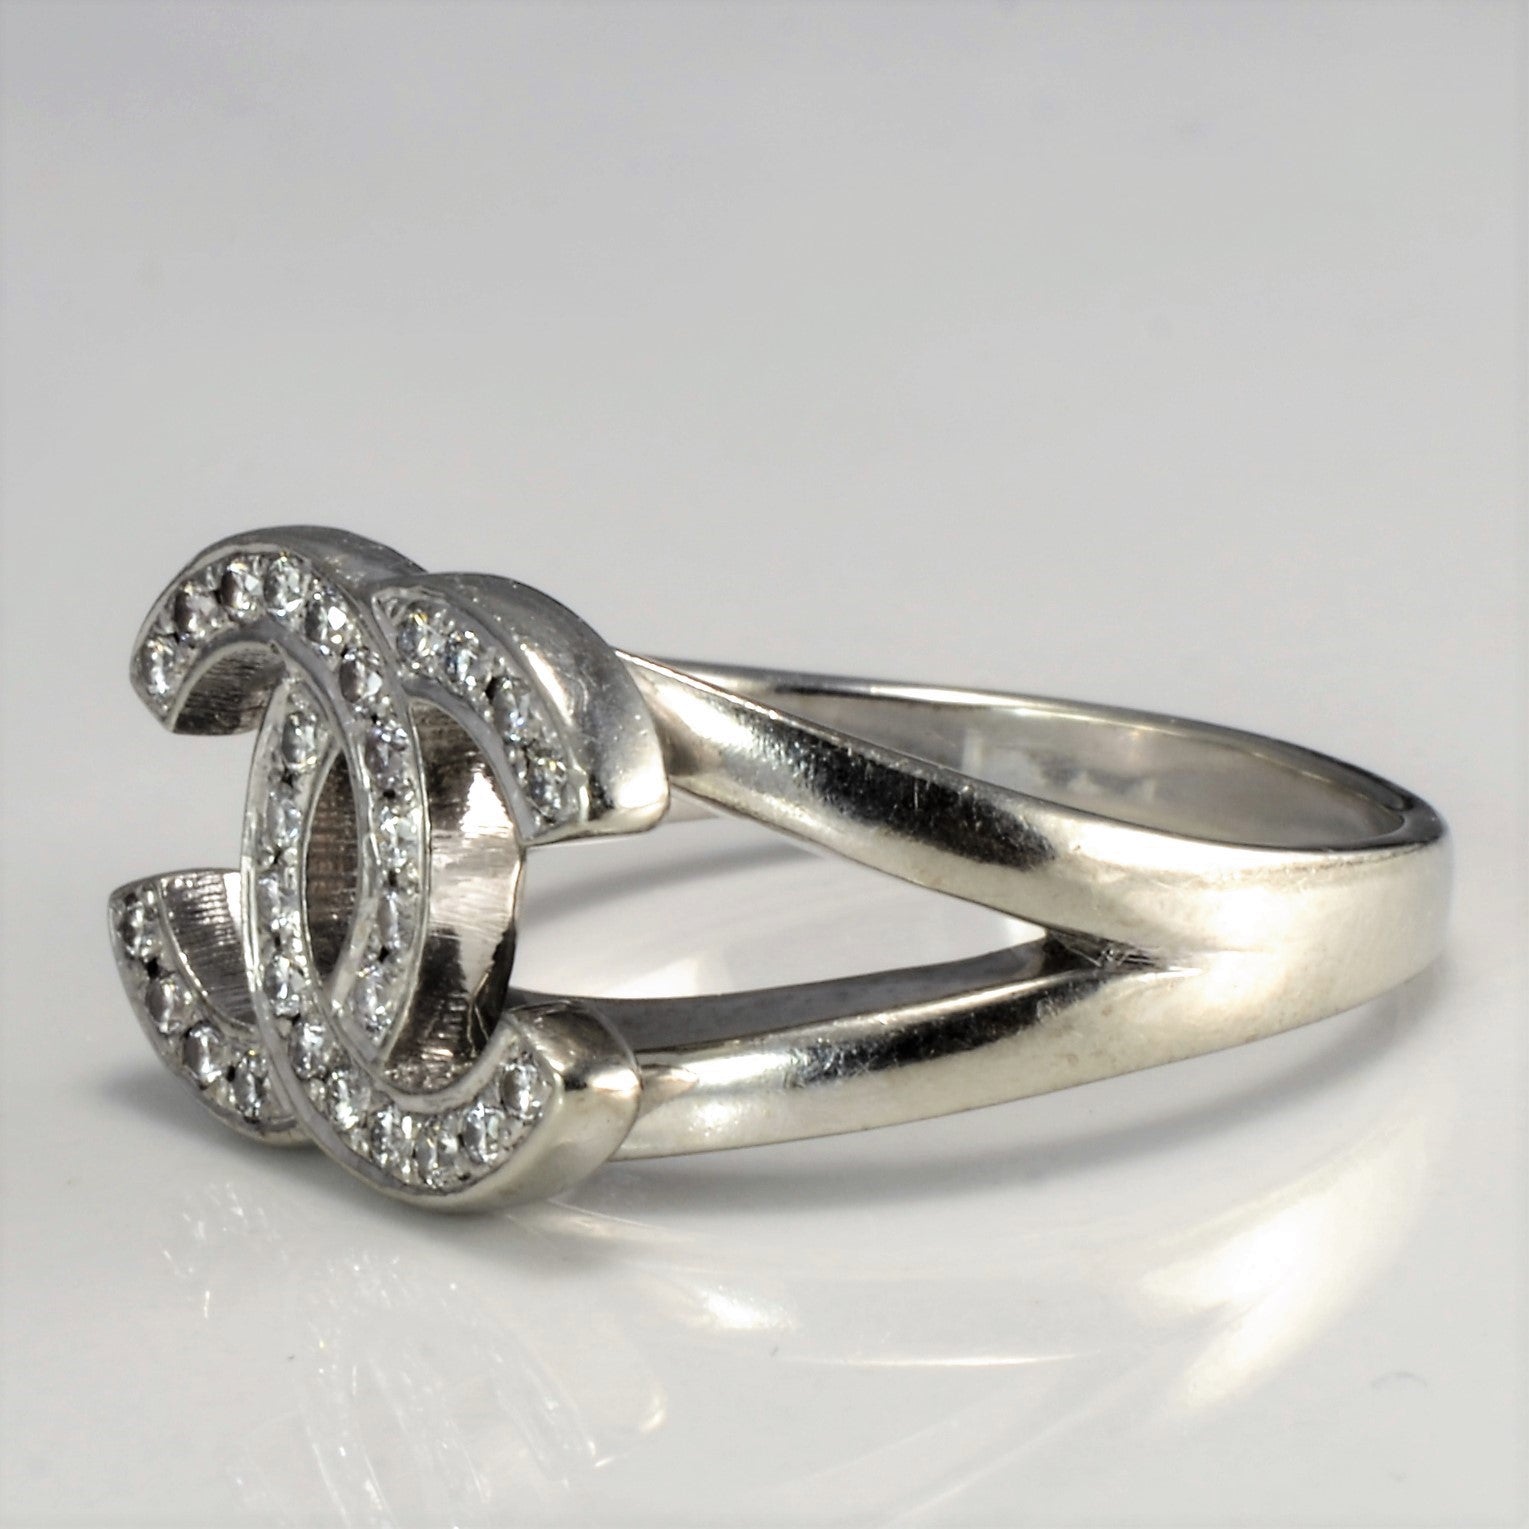 Chanel Inspired Ring | 0.28 ctw, SZ 7.25 |